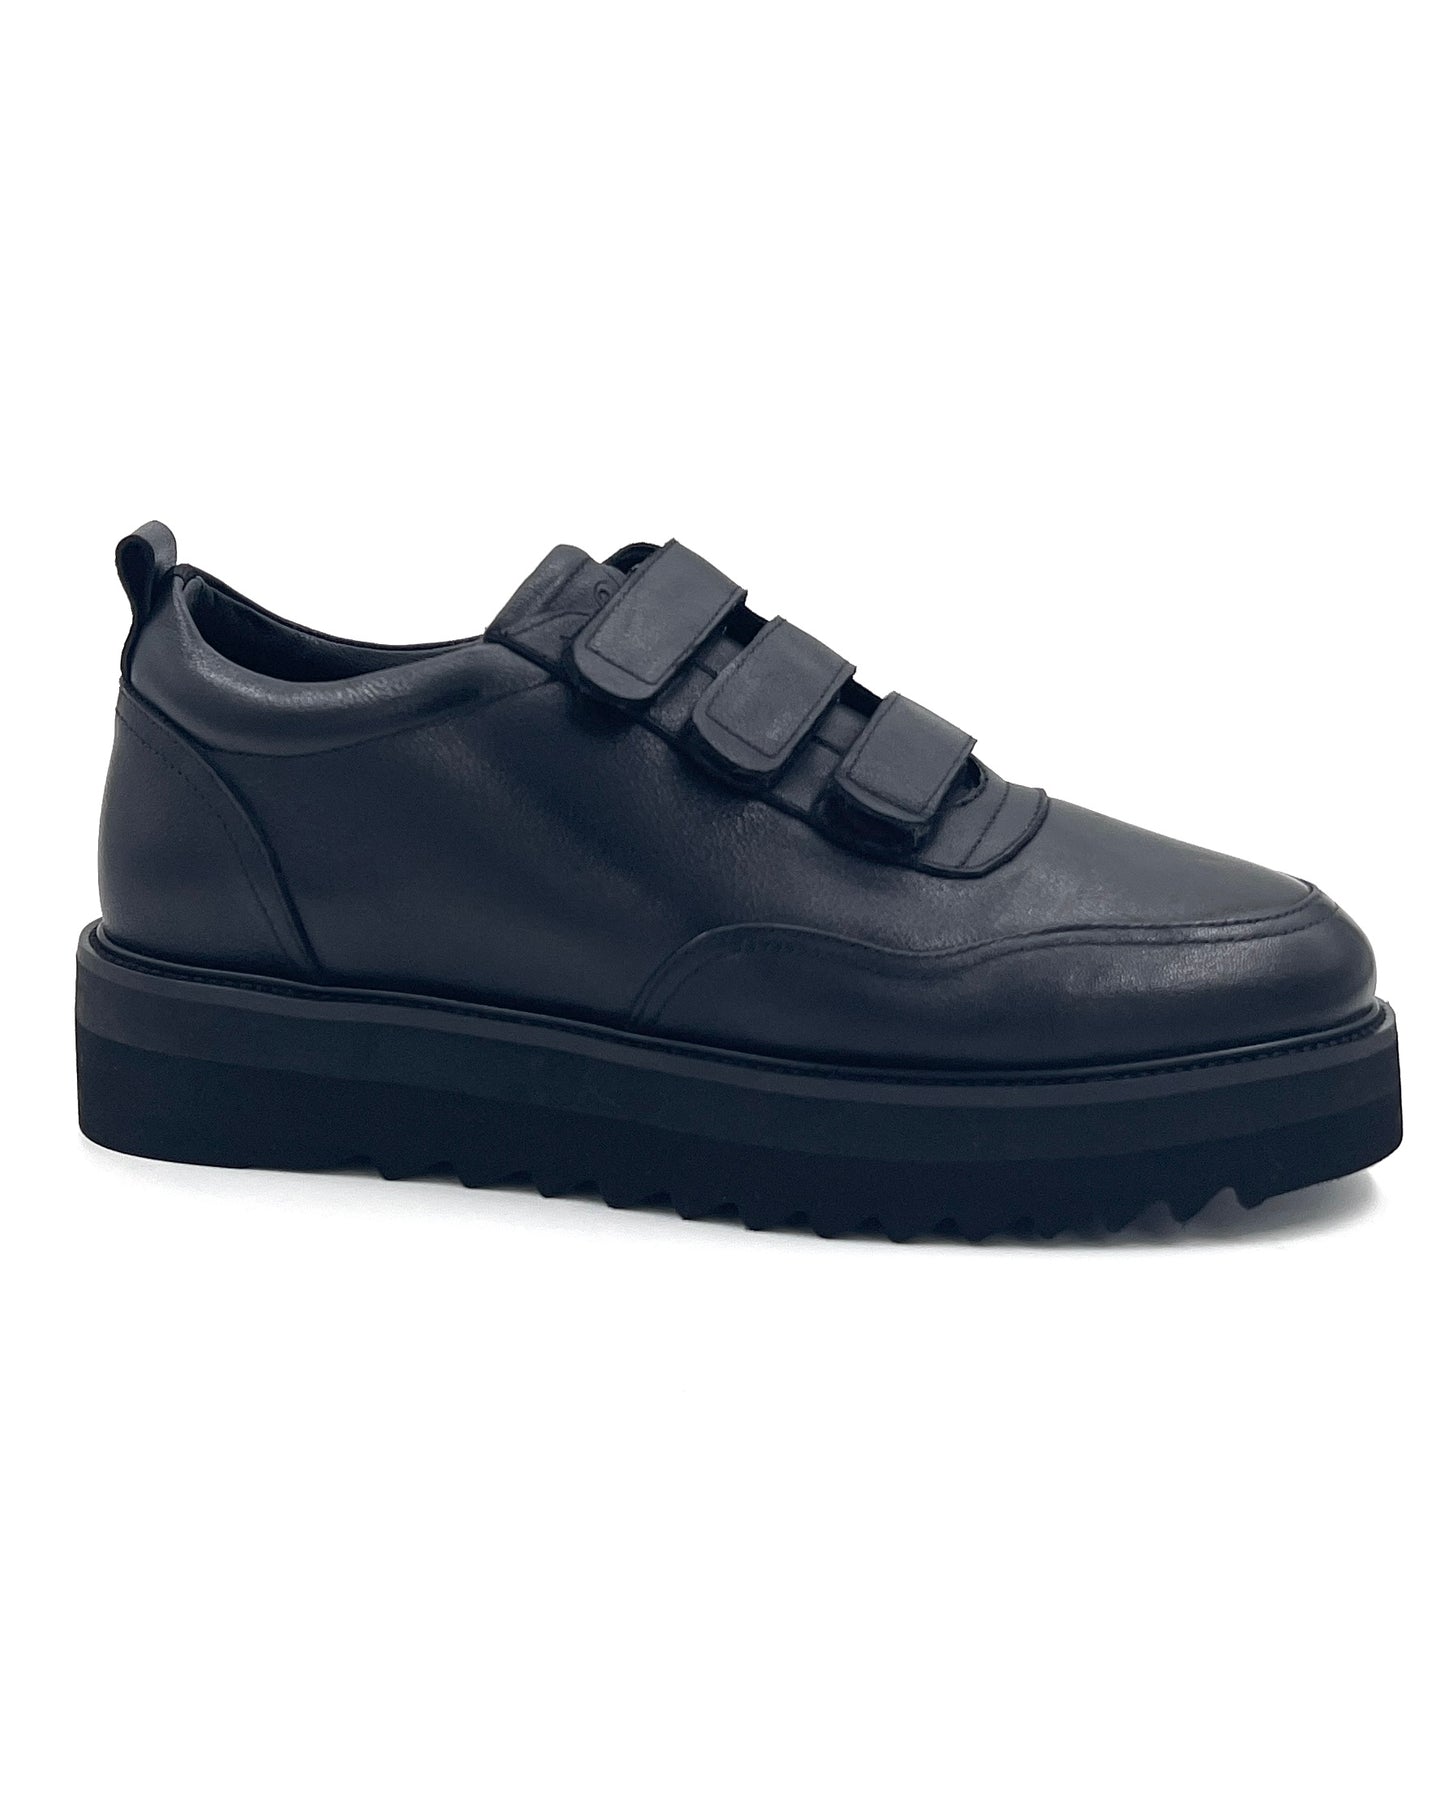 2H #S8042-26 Genuine Leather Black Casual Shoes